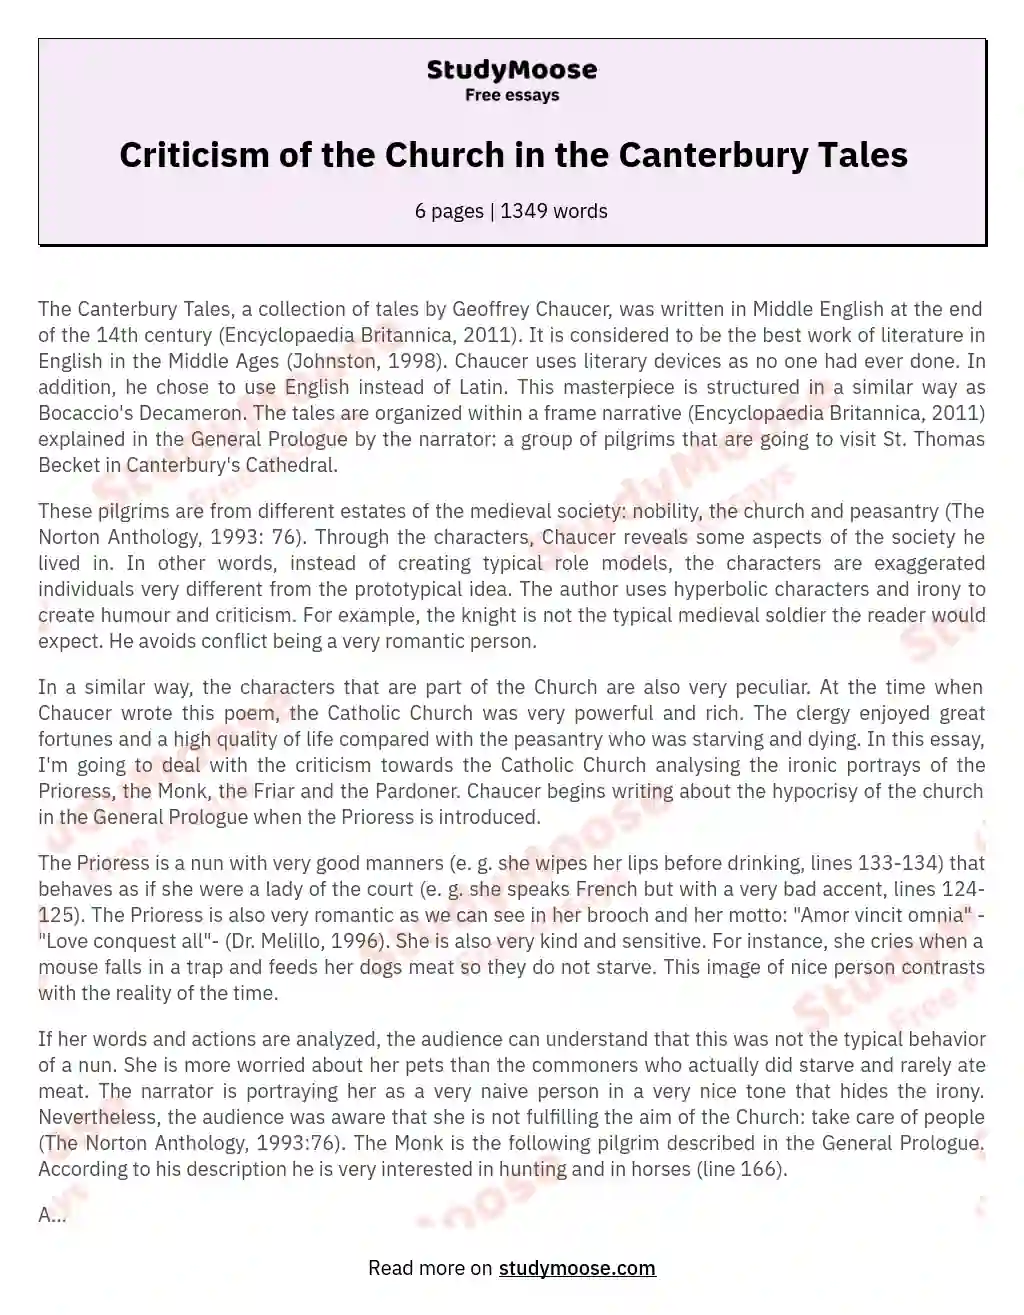 Criticism of the Church in the Canterbury Tales